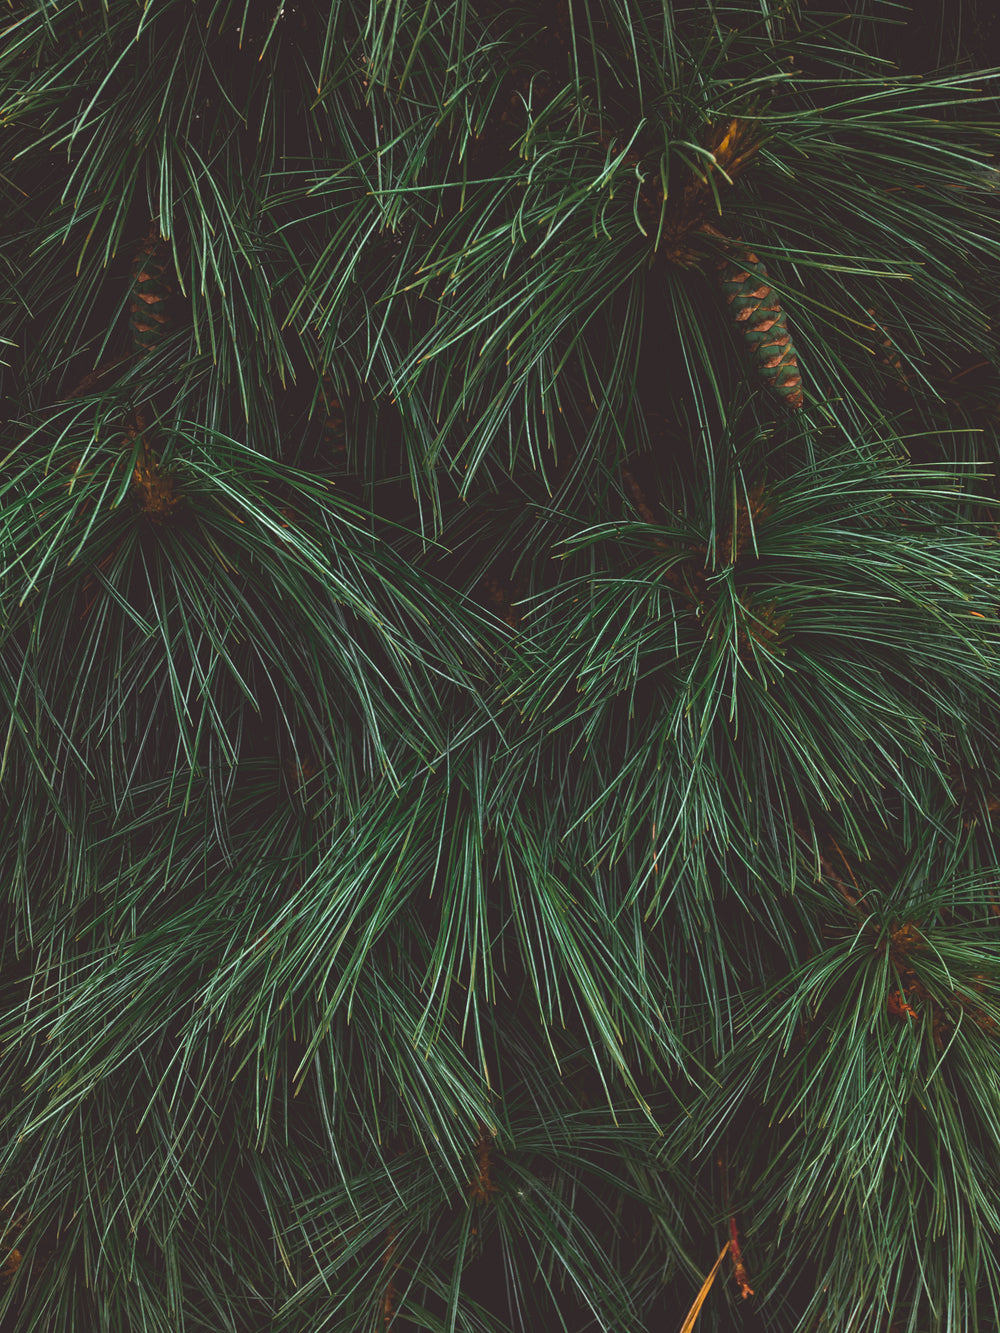 close up of a pine tree showing texture of pine needles